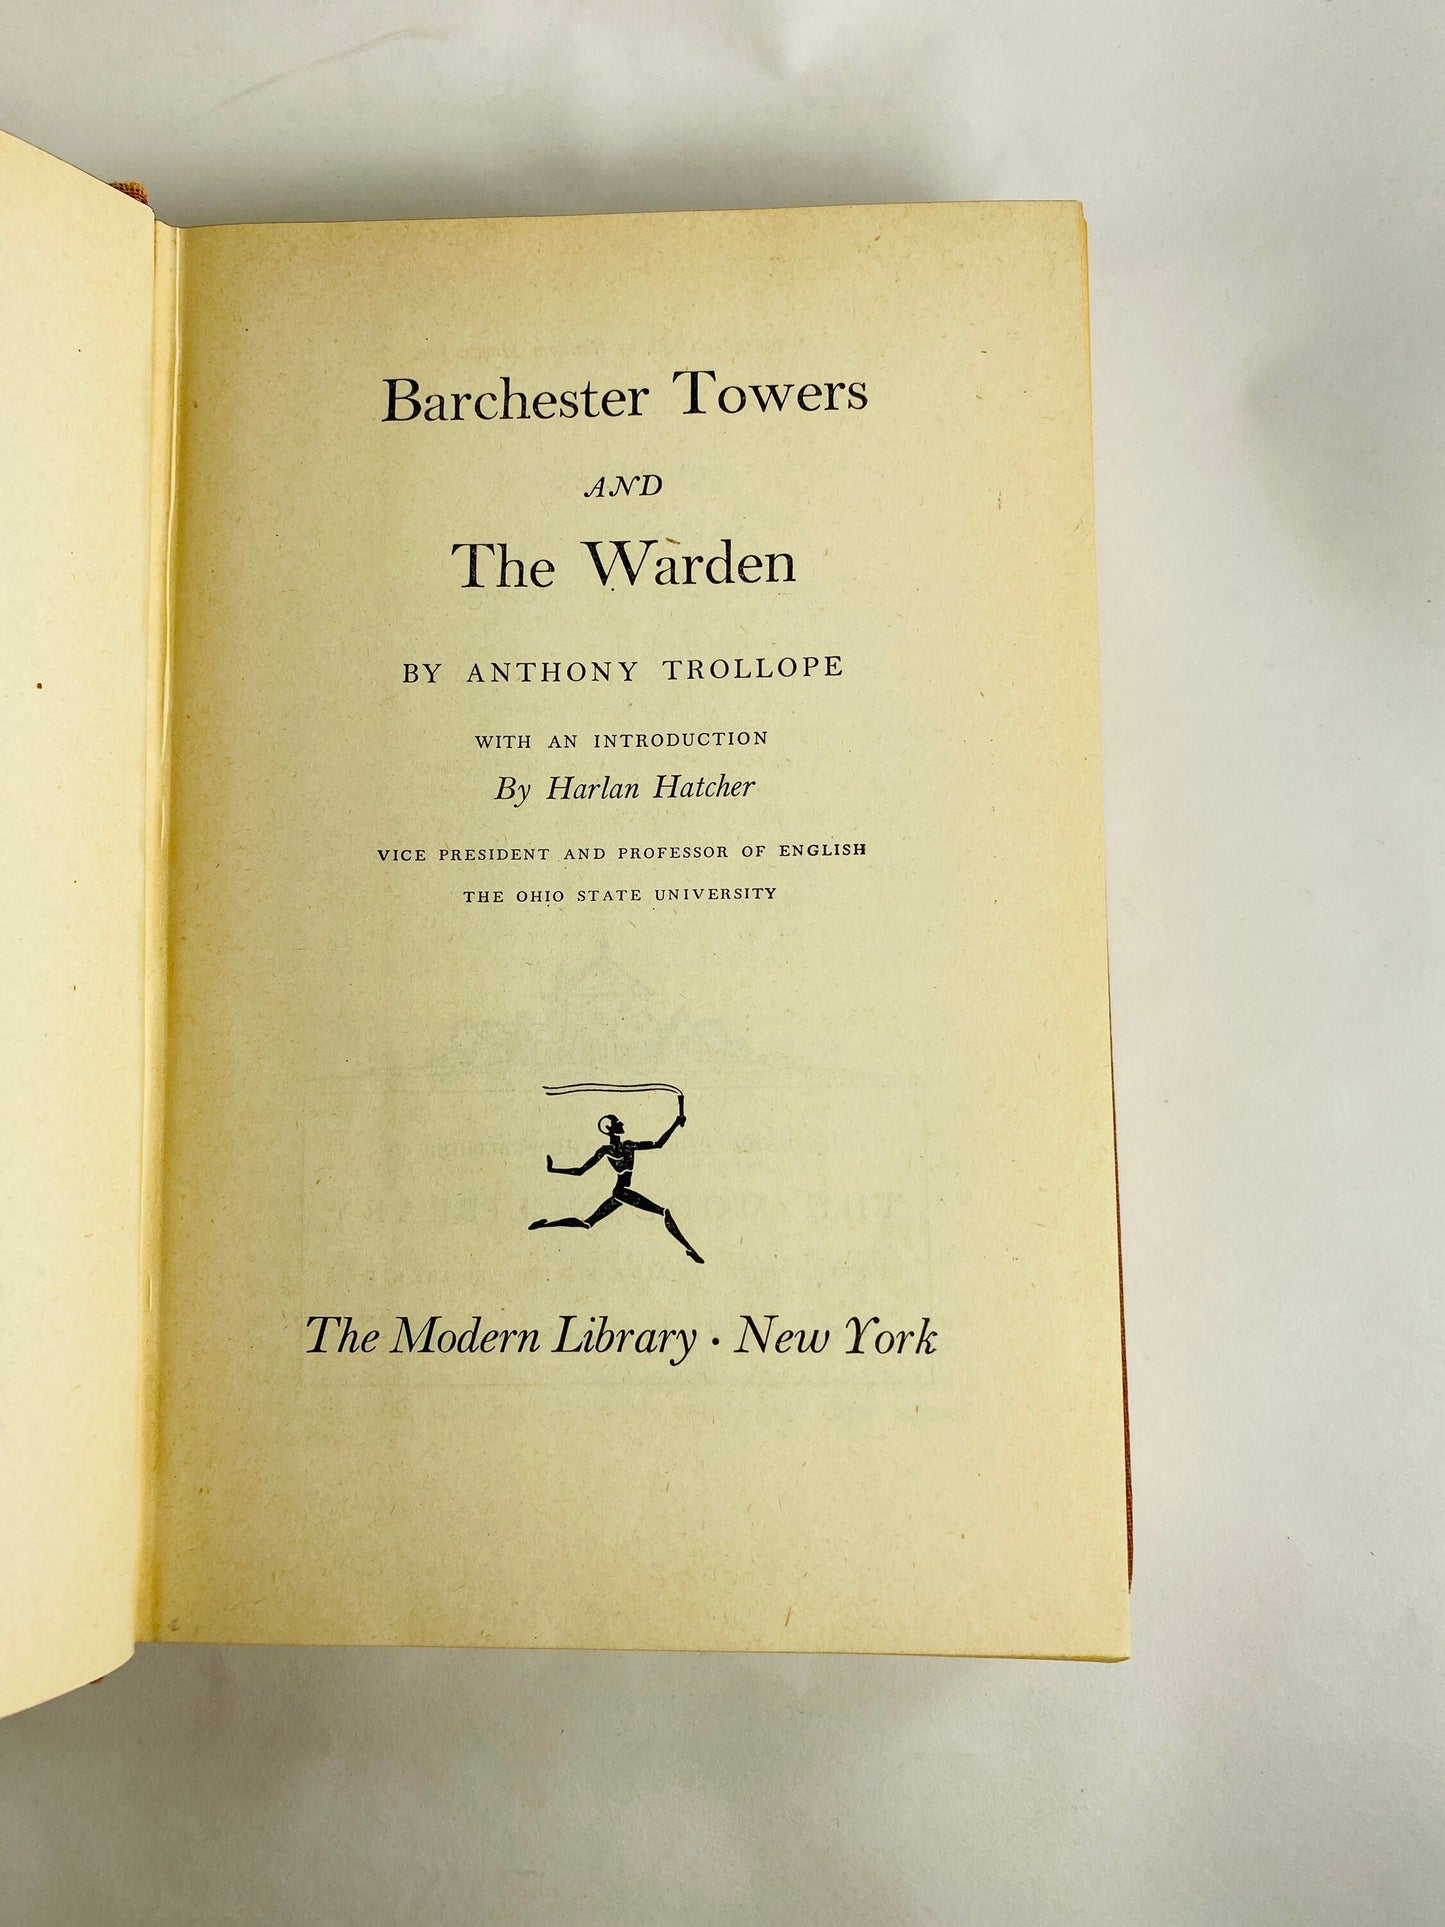 Barchester Towers and The Warden by Anthony Trollope. Vintage Modern Library book circa 1950. Red book decor. Chronicles of Barsetshire